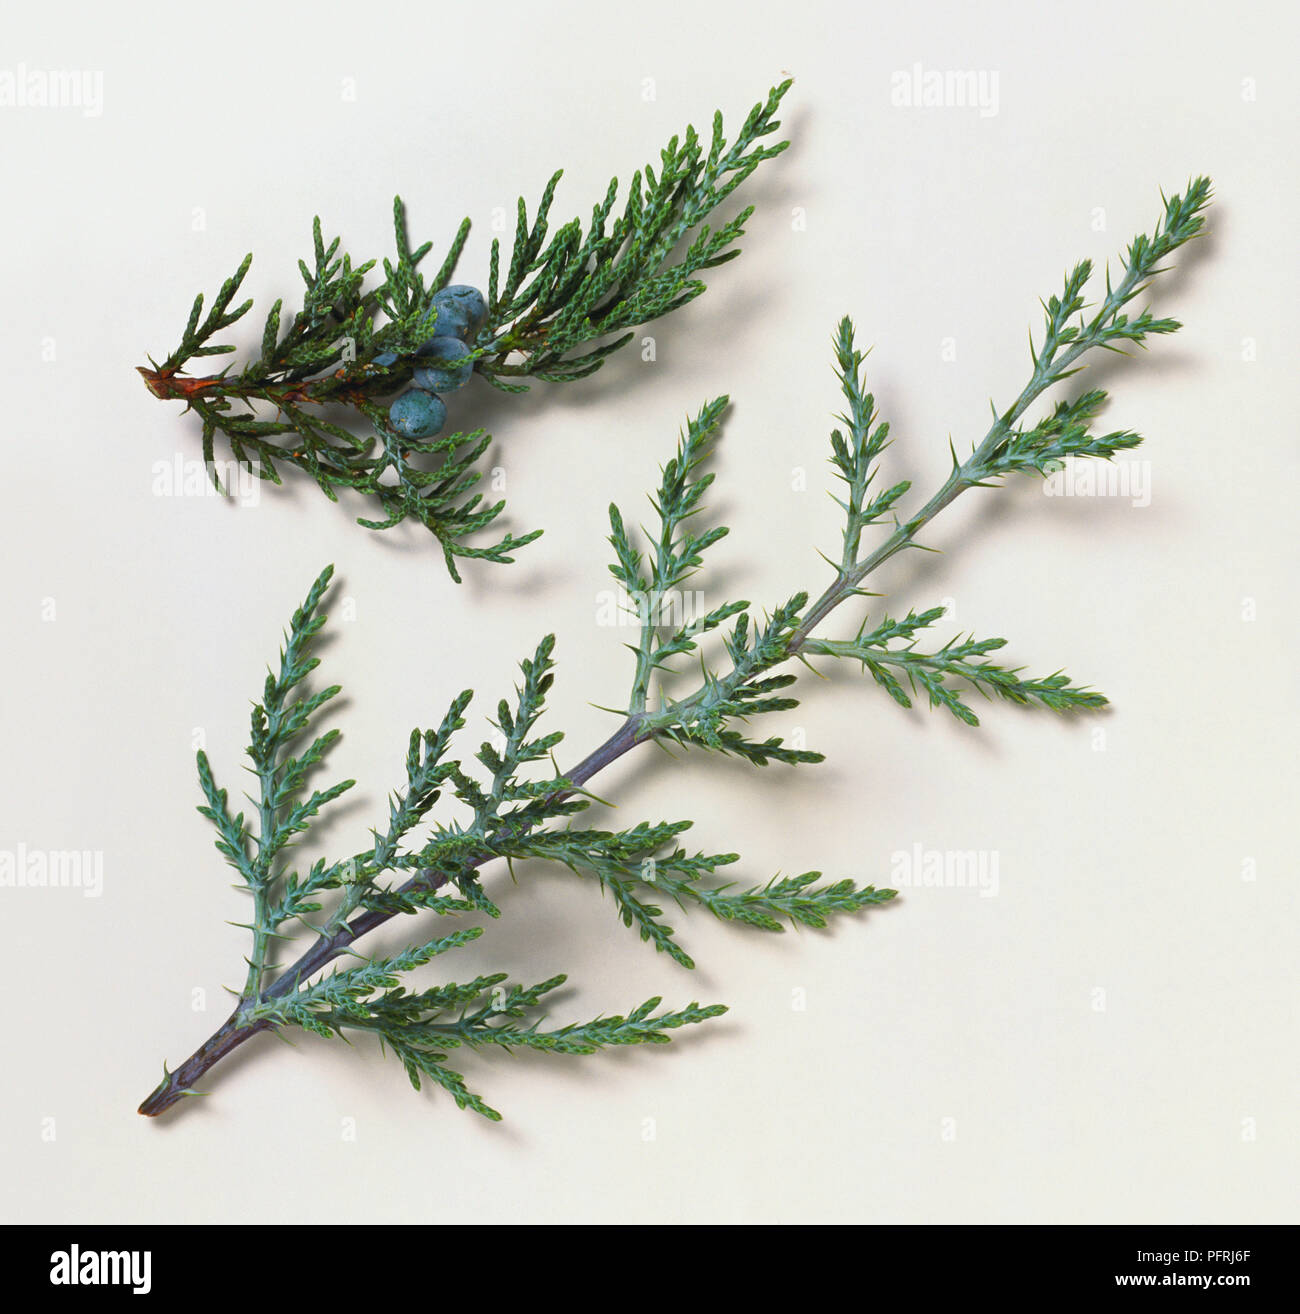 Juniperus occidentalis (Western juniper), two stems with green leaves and small blue cones Stock Photo